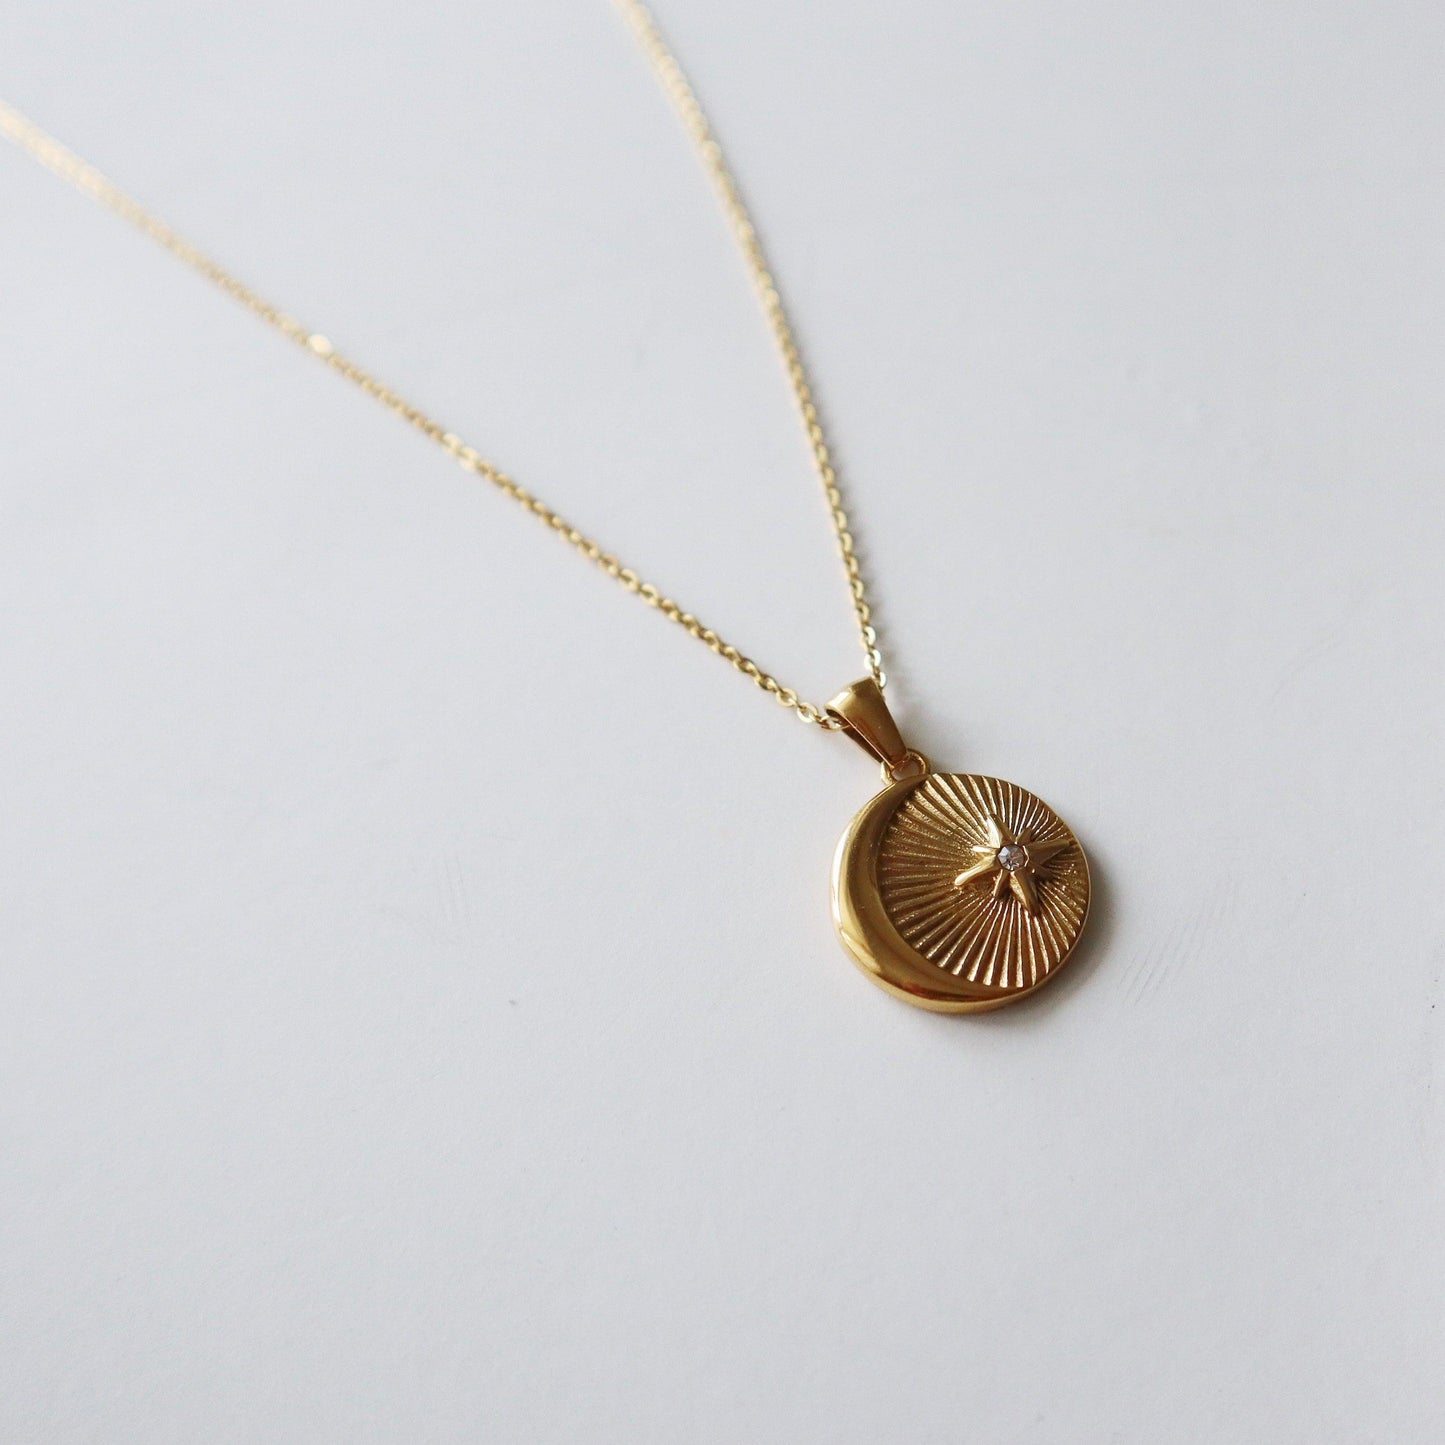 Vintage Moon and Star Necklace | Pendant Necklace - JESSA JEWELRY | GOLD JEWELRY; dainty, affordable gold everyday jewelry. Tarnish free, water-resistant, hypoallergenic. Jewelry for everyday wear